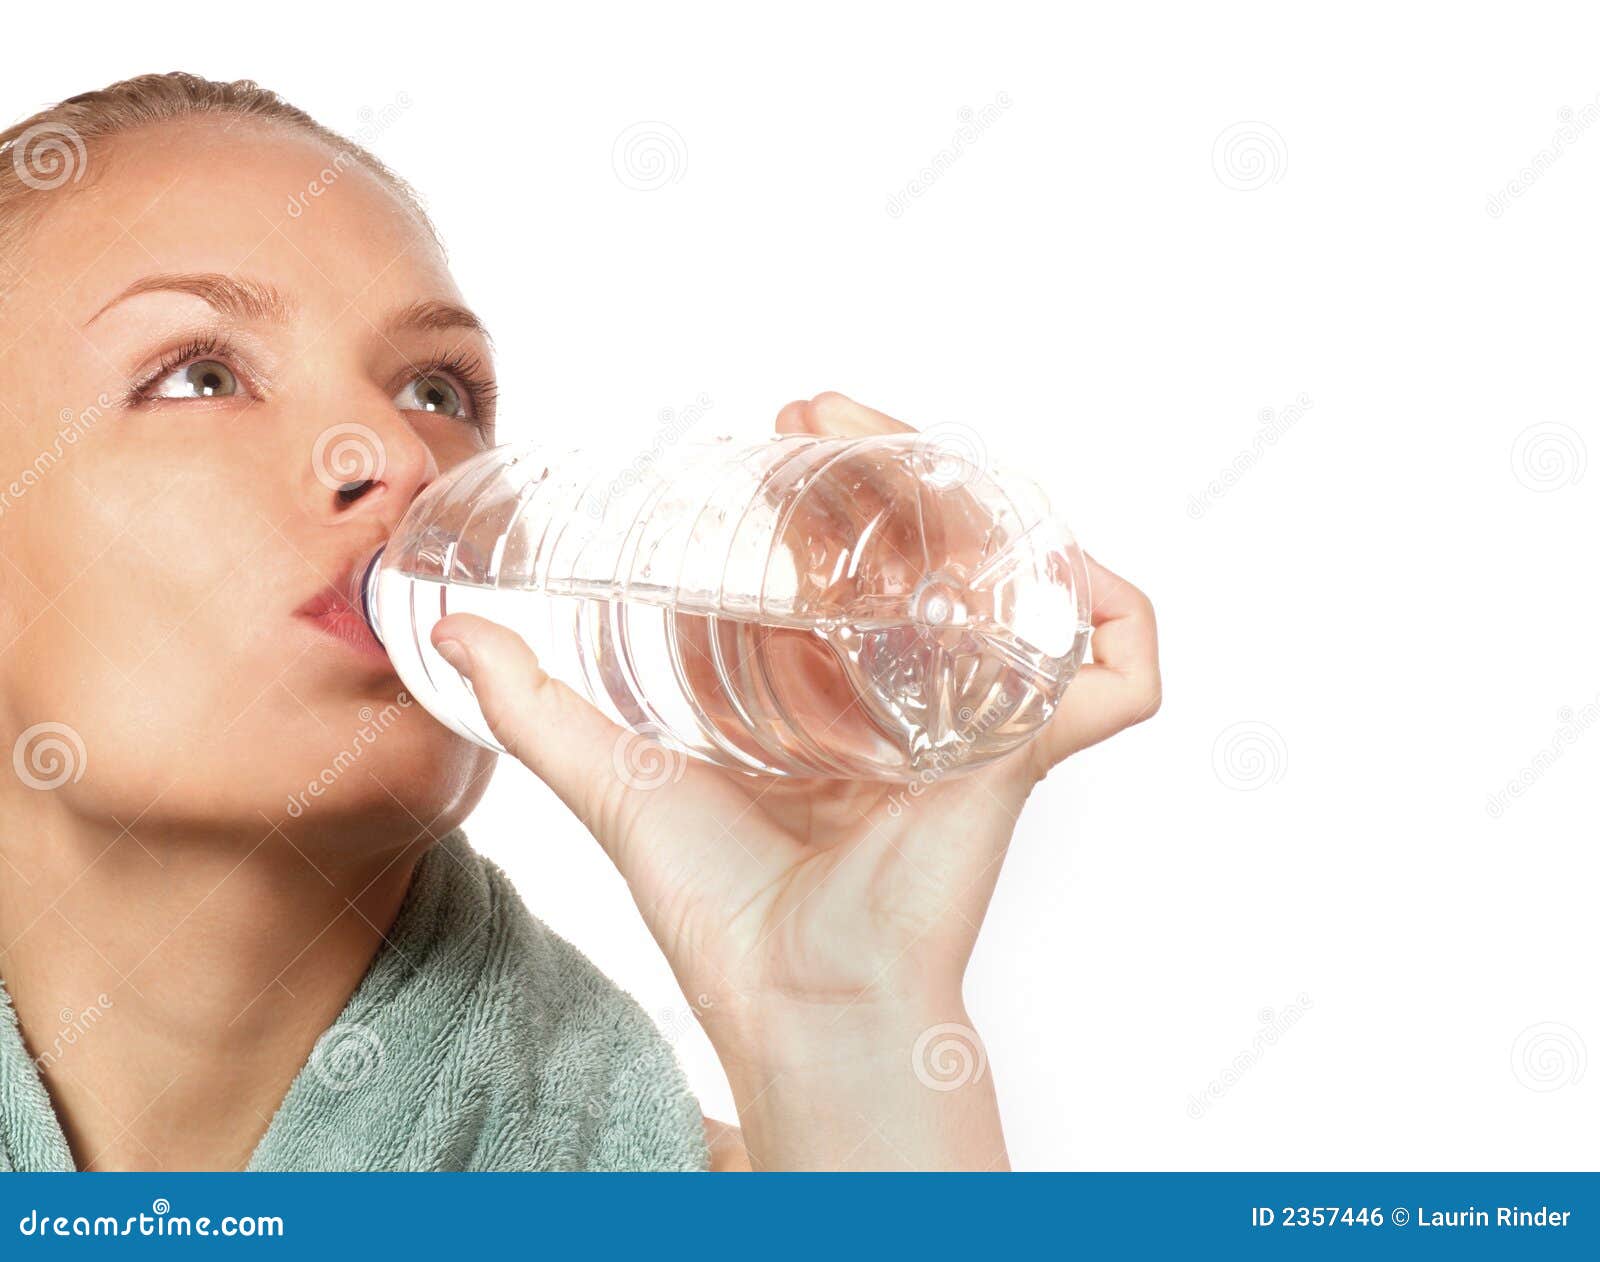 Woman And Water Bottle Royalty Free Stock Image - Image: 2357446